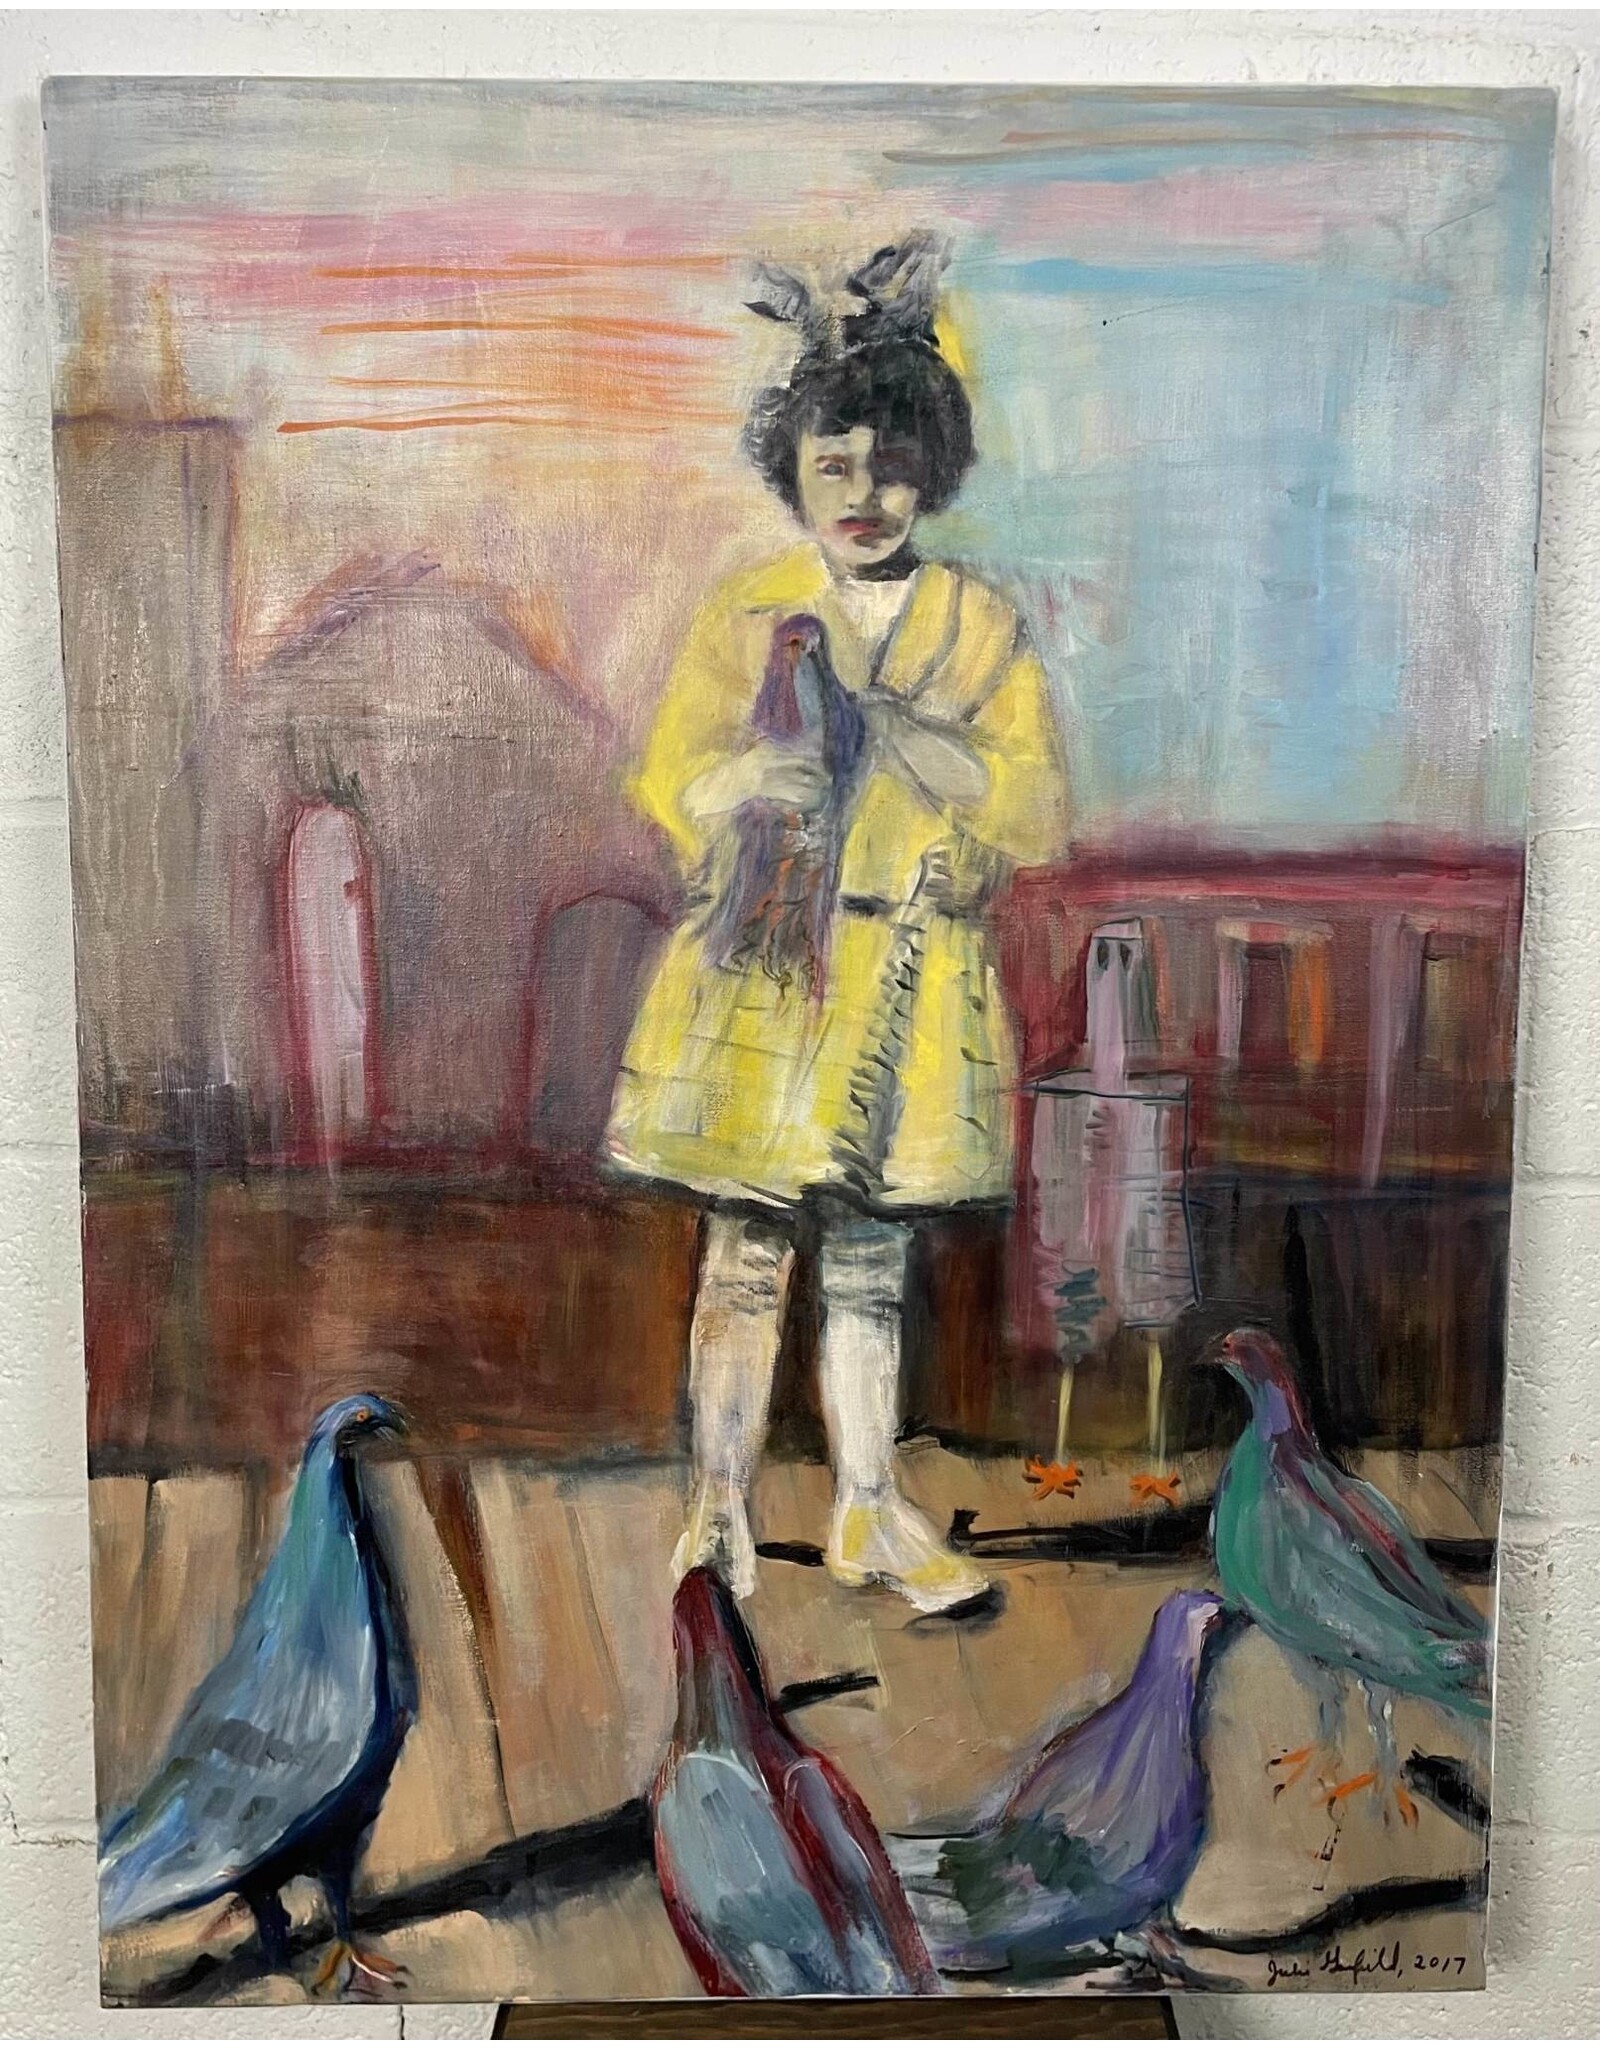 Girl with Pigeons and Robot Acrylic Painting by Julie Garfield 2017